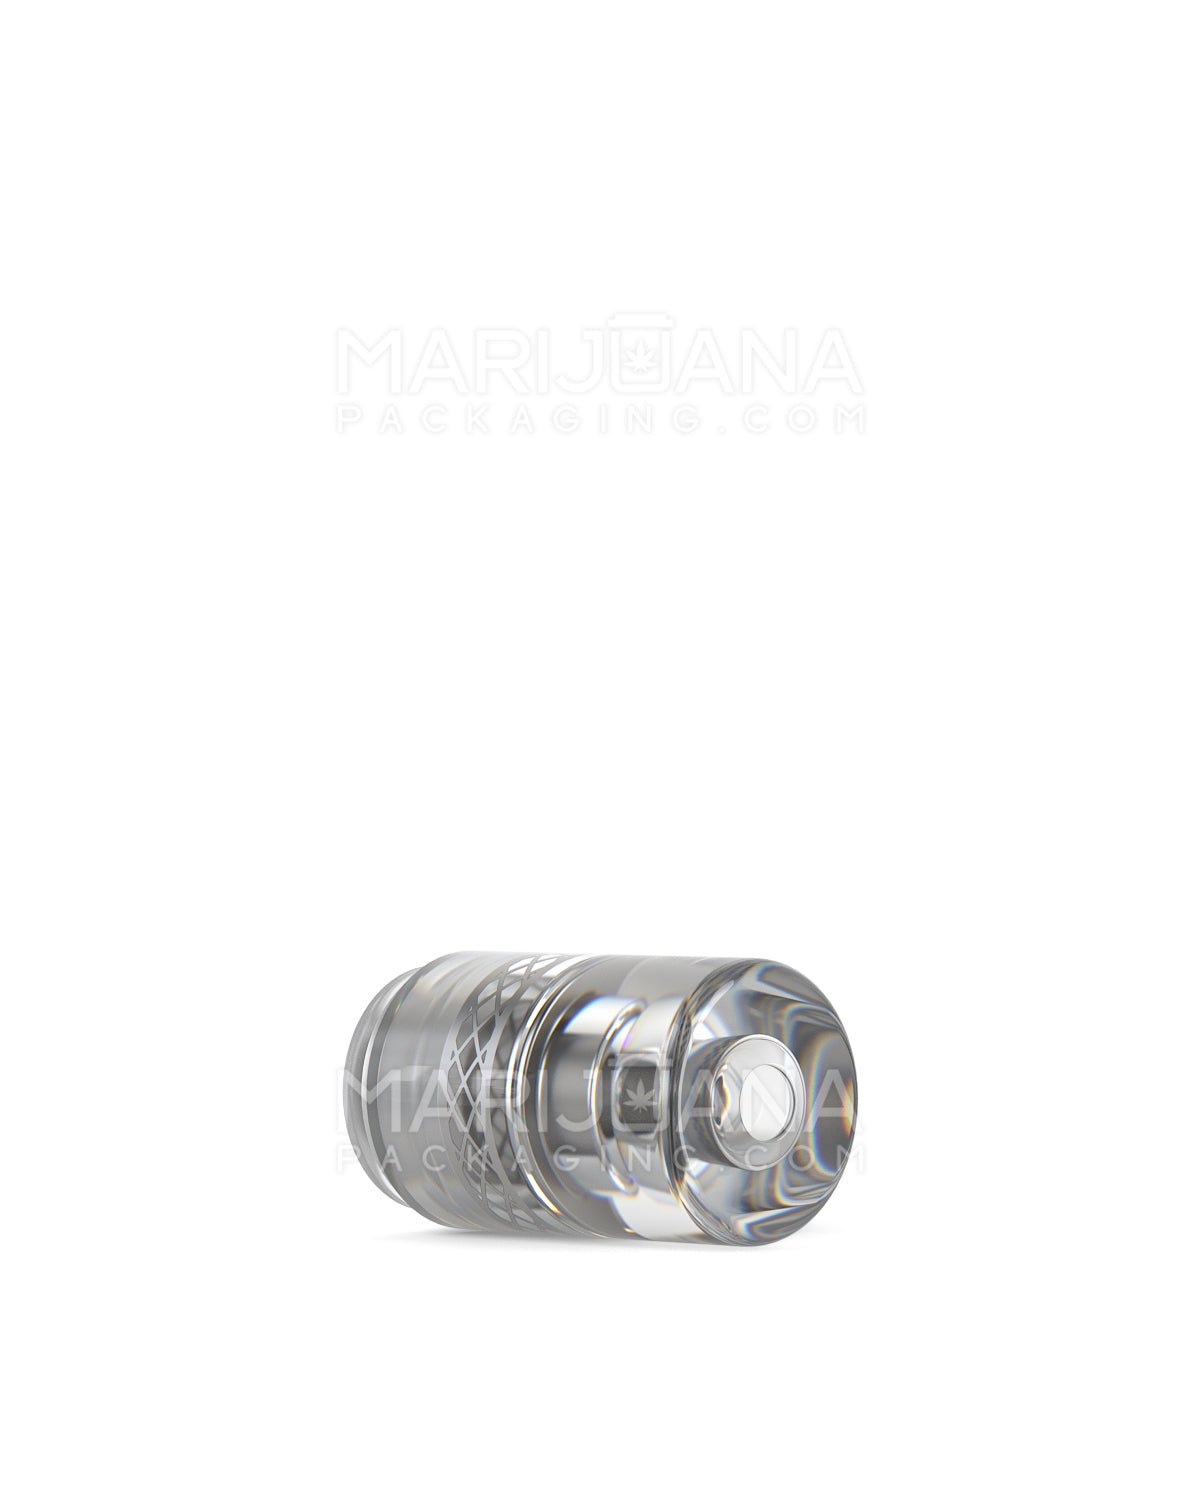 AVD | Barrel Vape Mouthpiece for Glass Cartridges | Clear Plastic - Screw On - 600 Count - 5